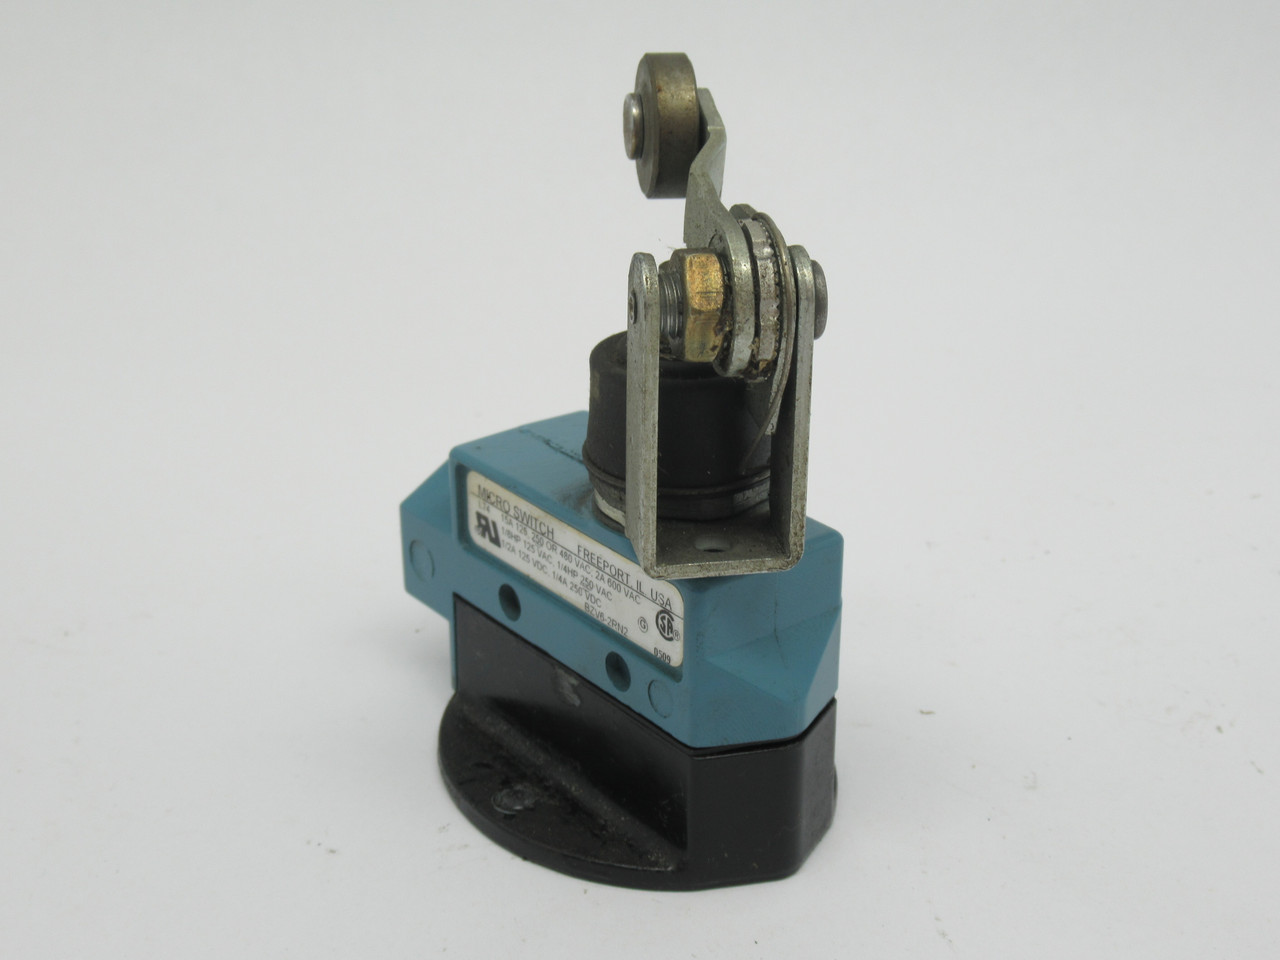 Microswitch BZV6-2RN2 Top Roller Arm Limit Switch 15A 250VDC 600VAC USED